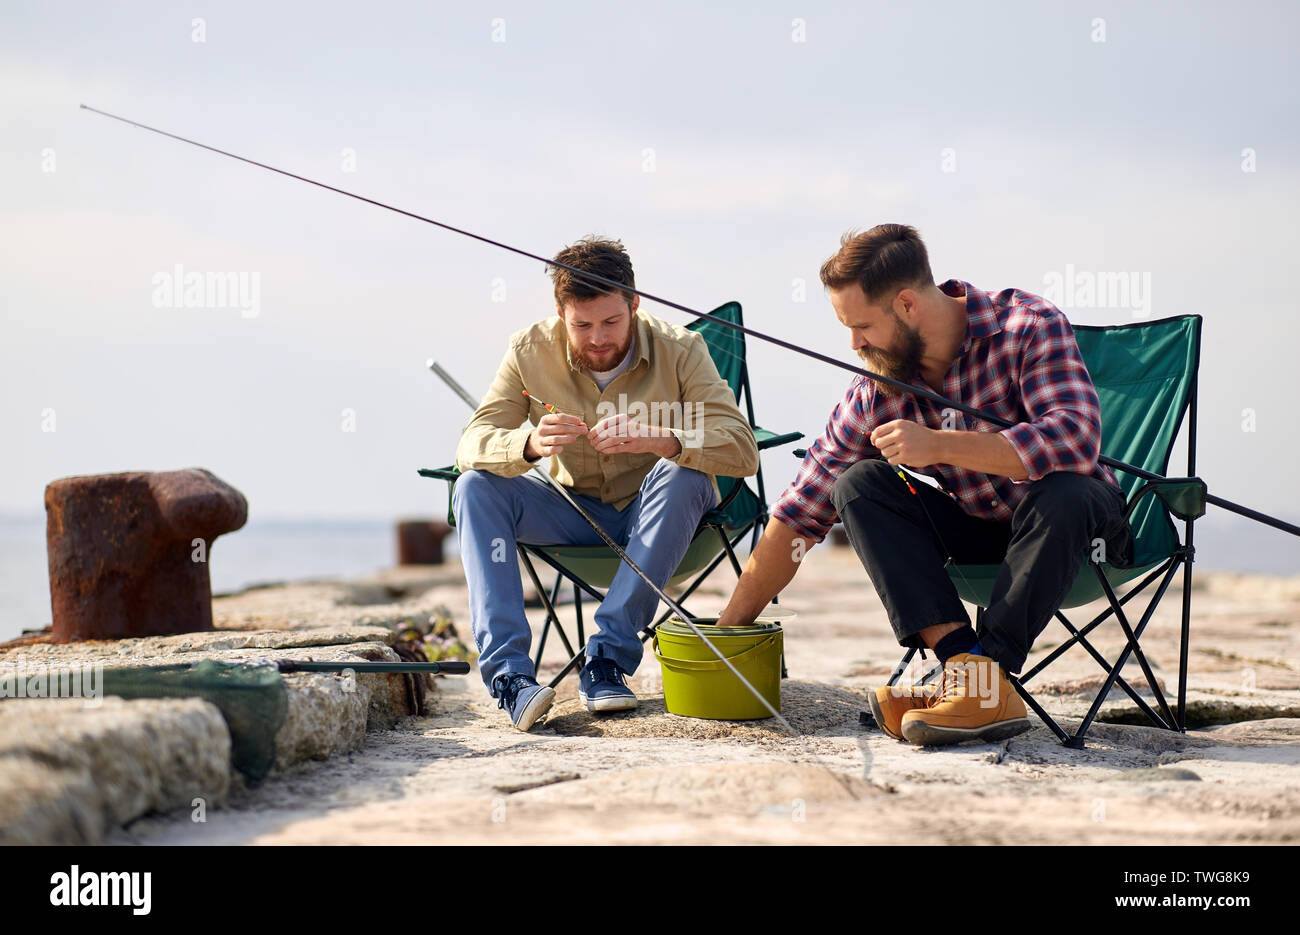 Fishing chair hi-res stock photography and images - Page 16 - Alamy